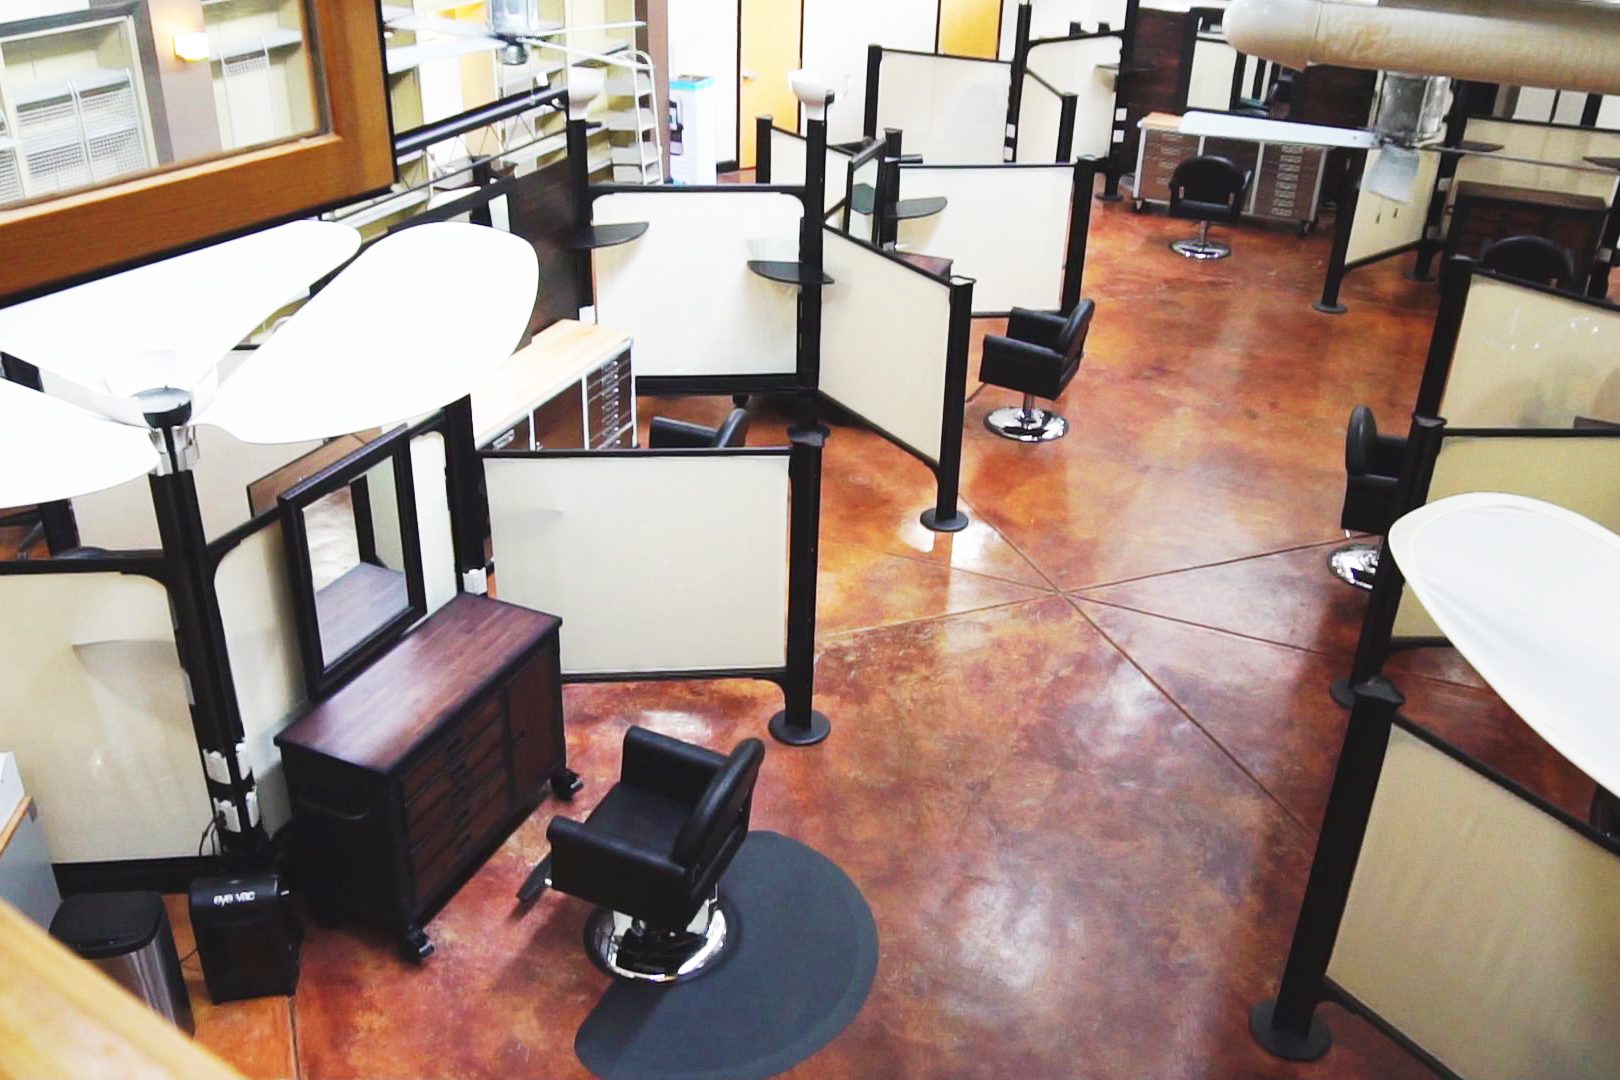 A barber shop with many chairs and tables.